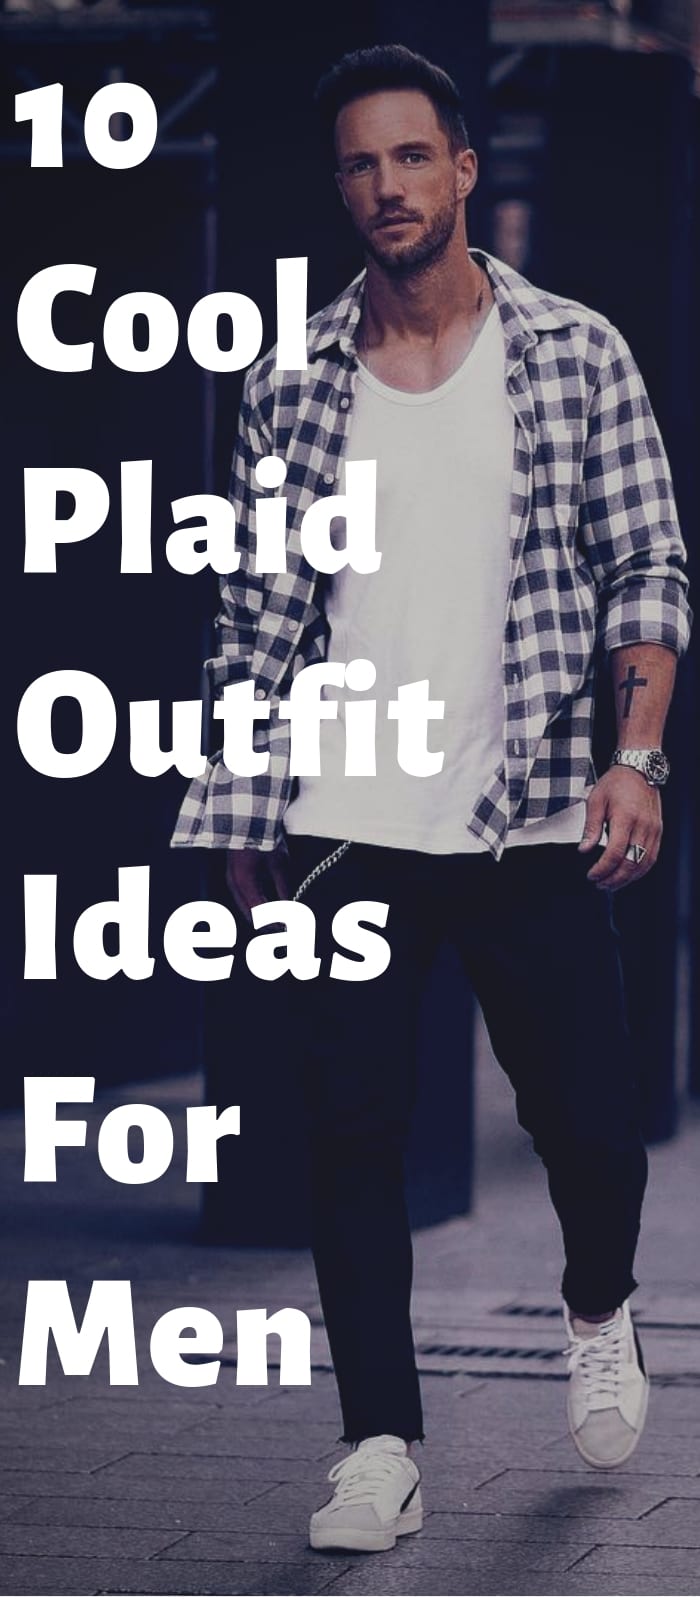 10 Cool Plaid Outfit Ideas For Men